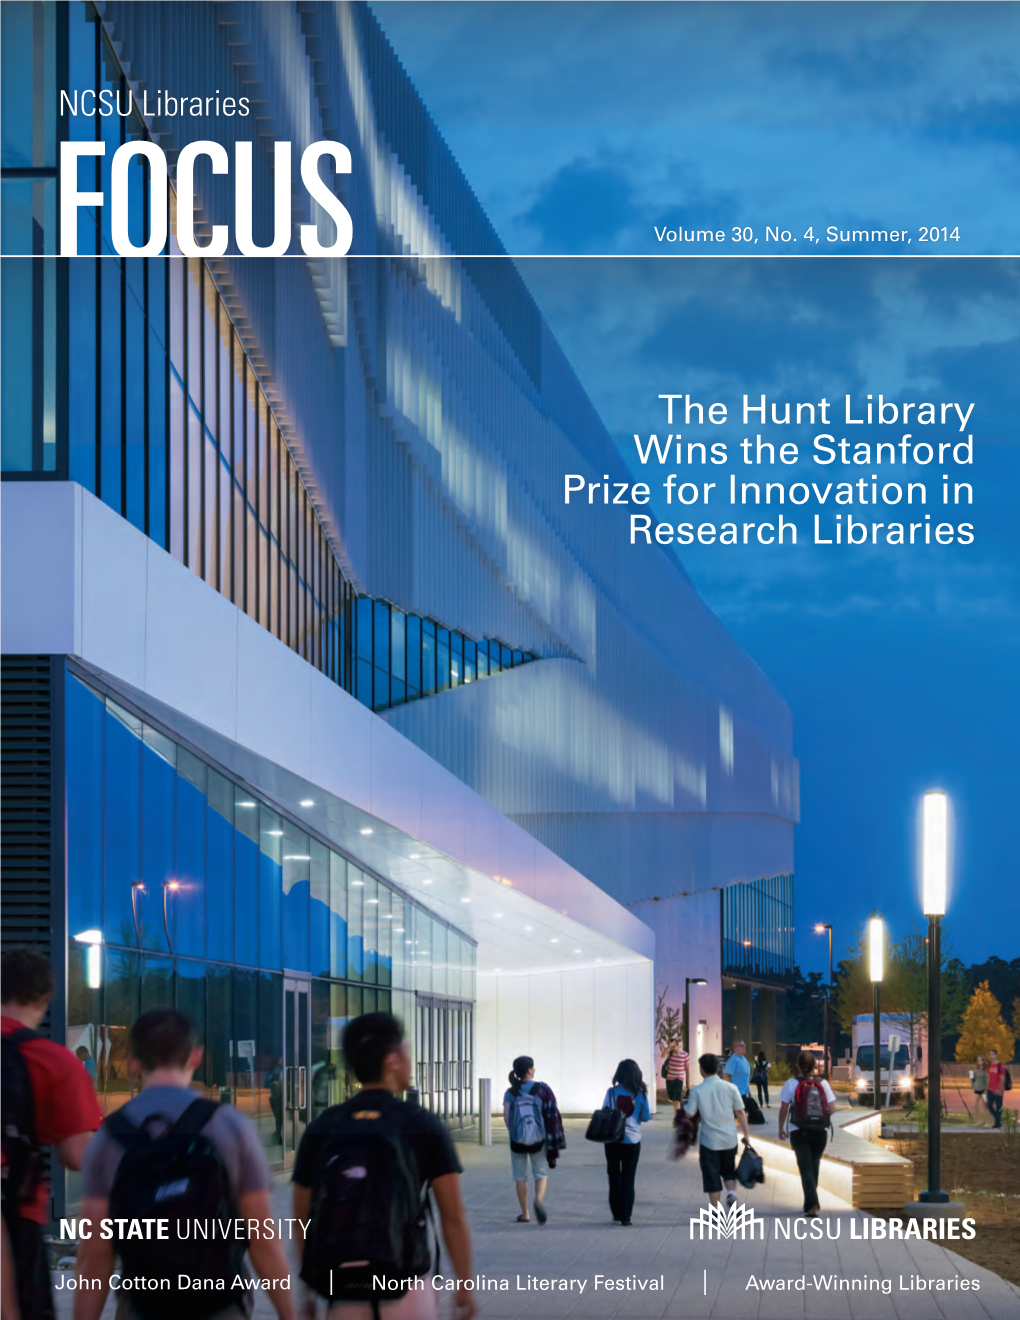 The Hunt Library Wins the Stanford Prize for Innovation in Research Libraries